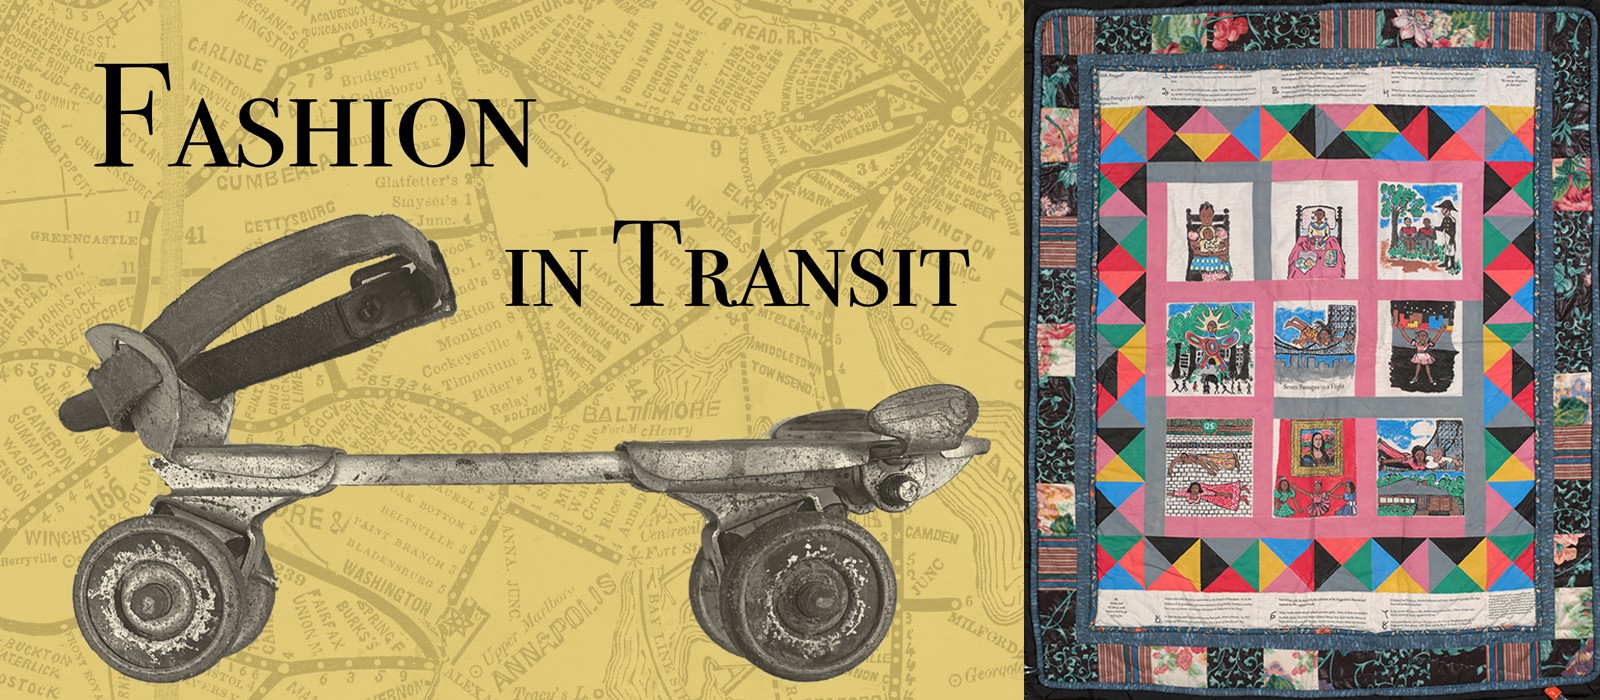 Images from Fashion in Transit